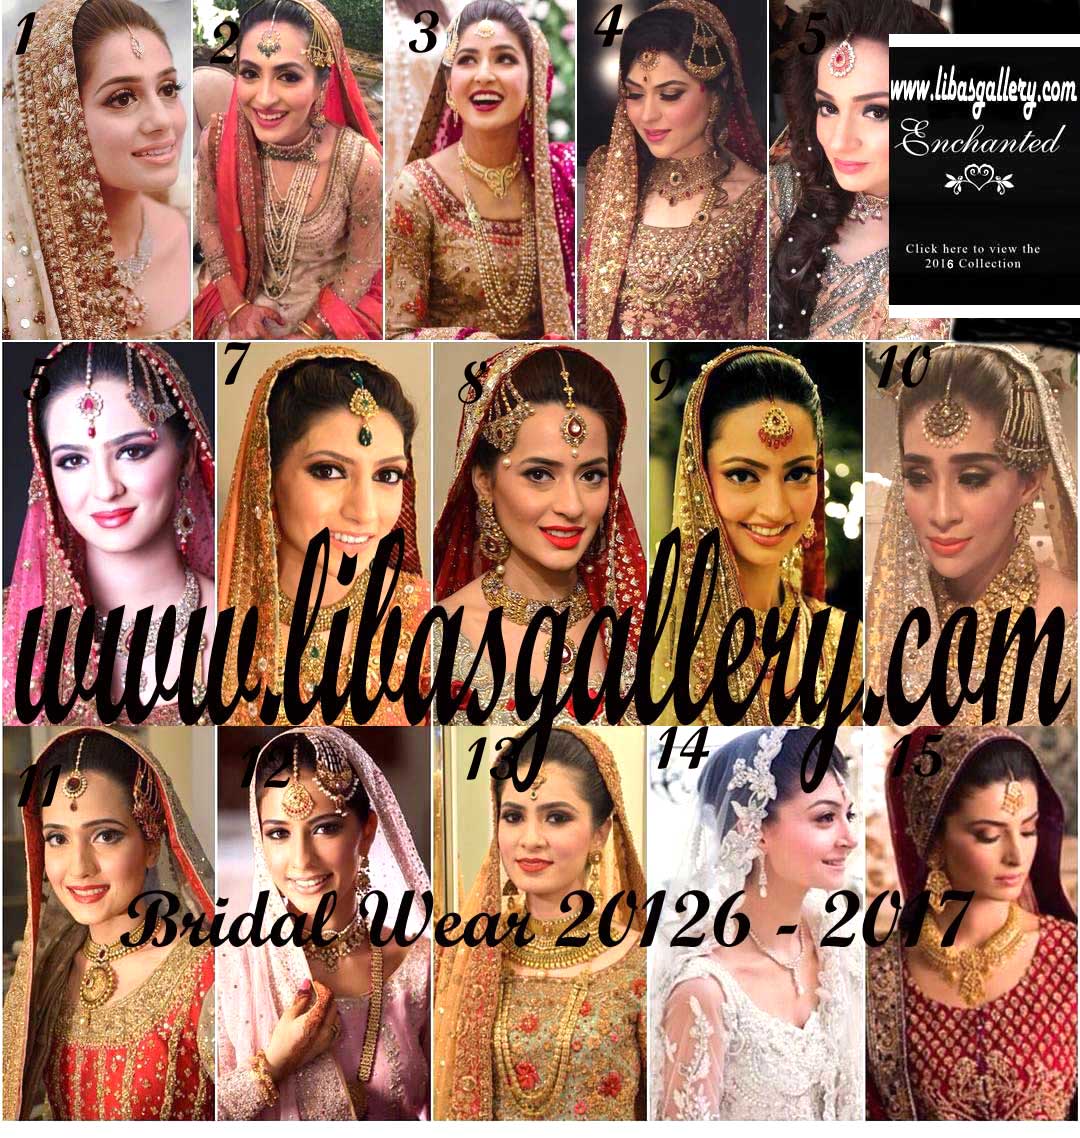 New Bridal Wear Arrivals, The Latest Bridal Dresses Style Occasion Dresses, Wedding Dresses and Bridal Gowns Bridal Accessories huge discount at libasgallery.com 